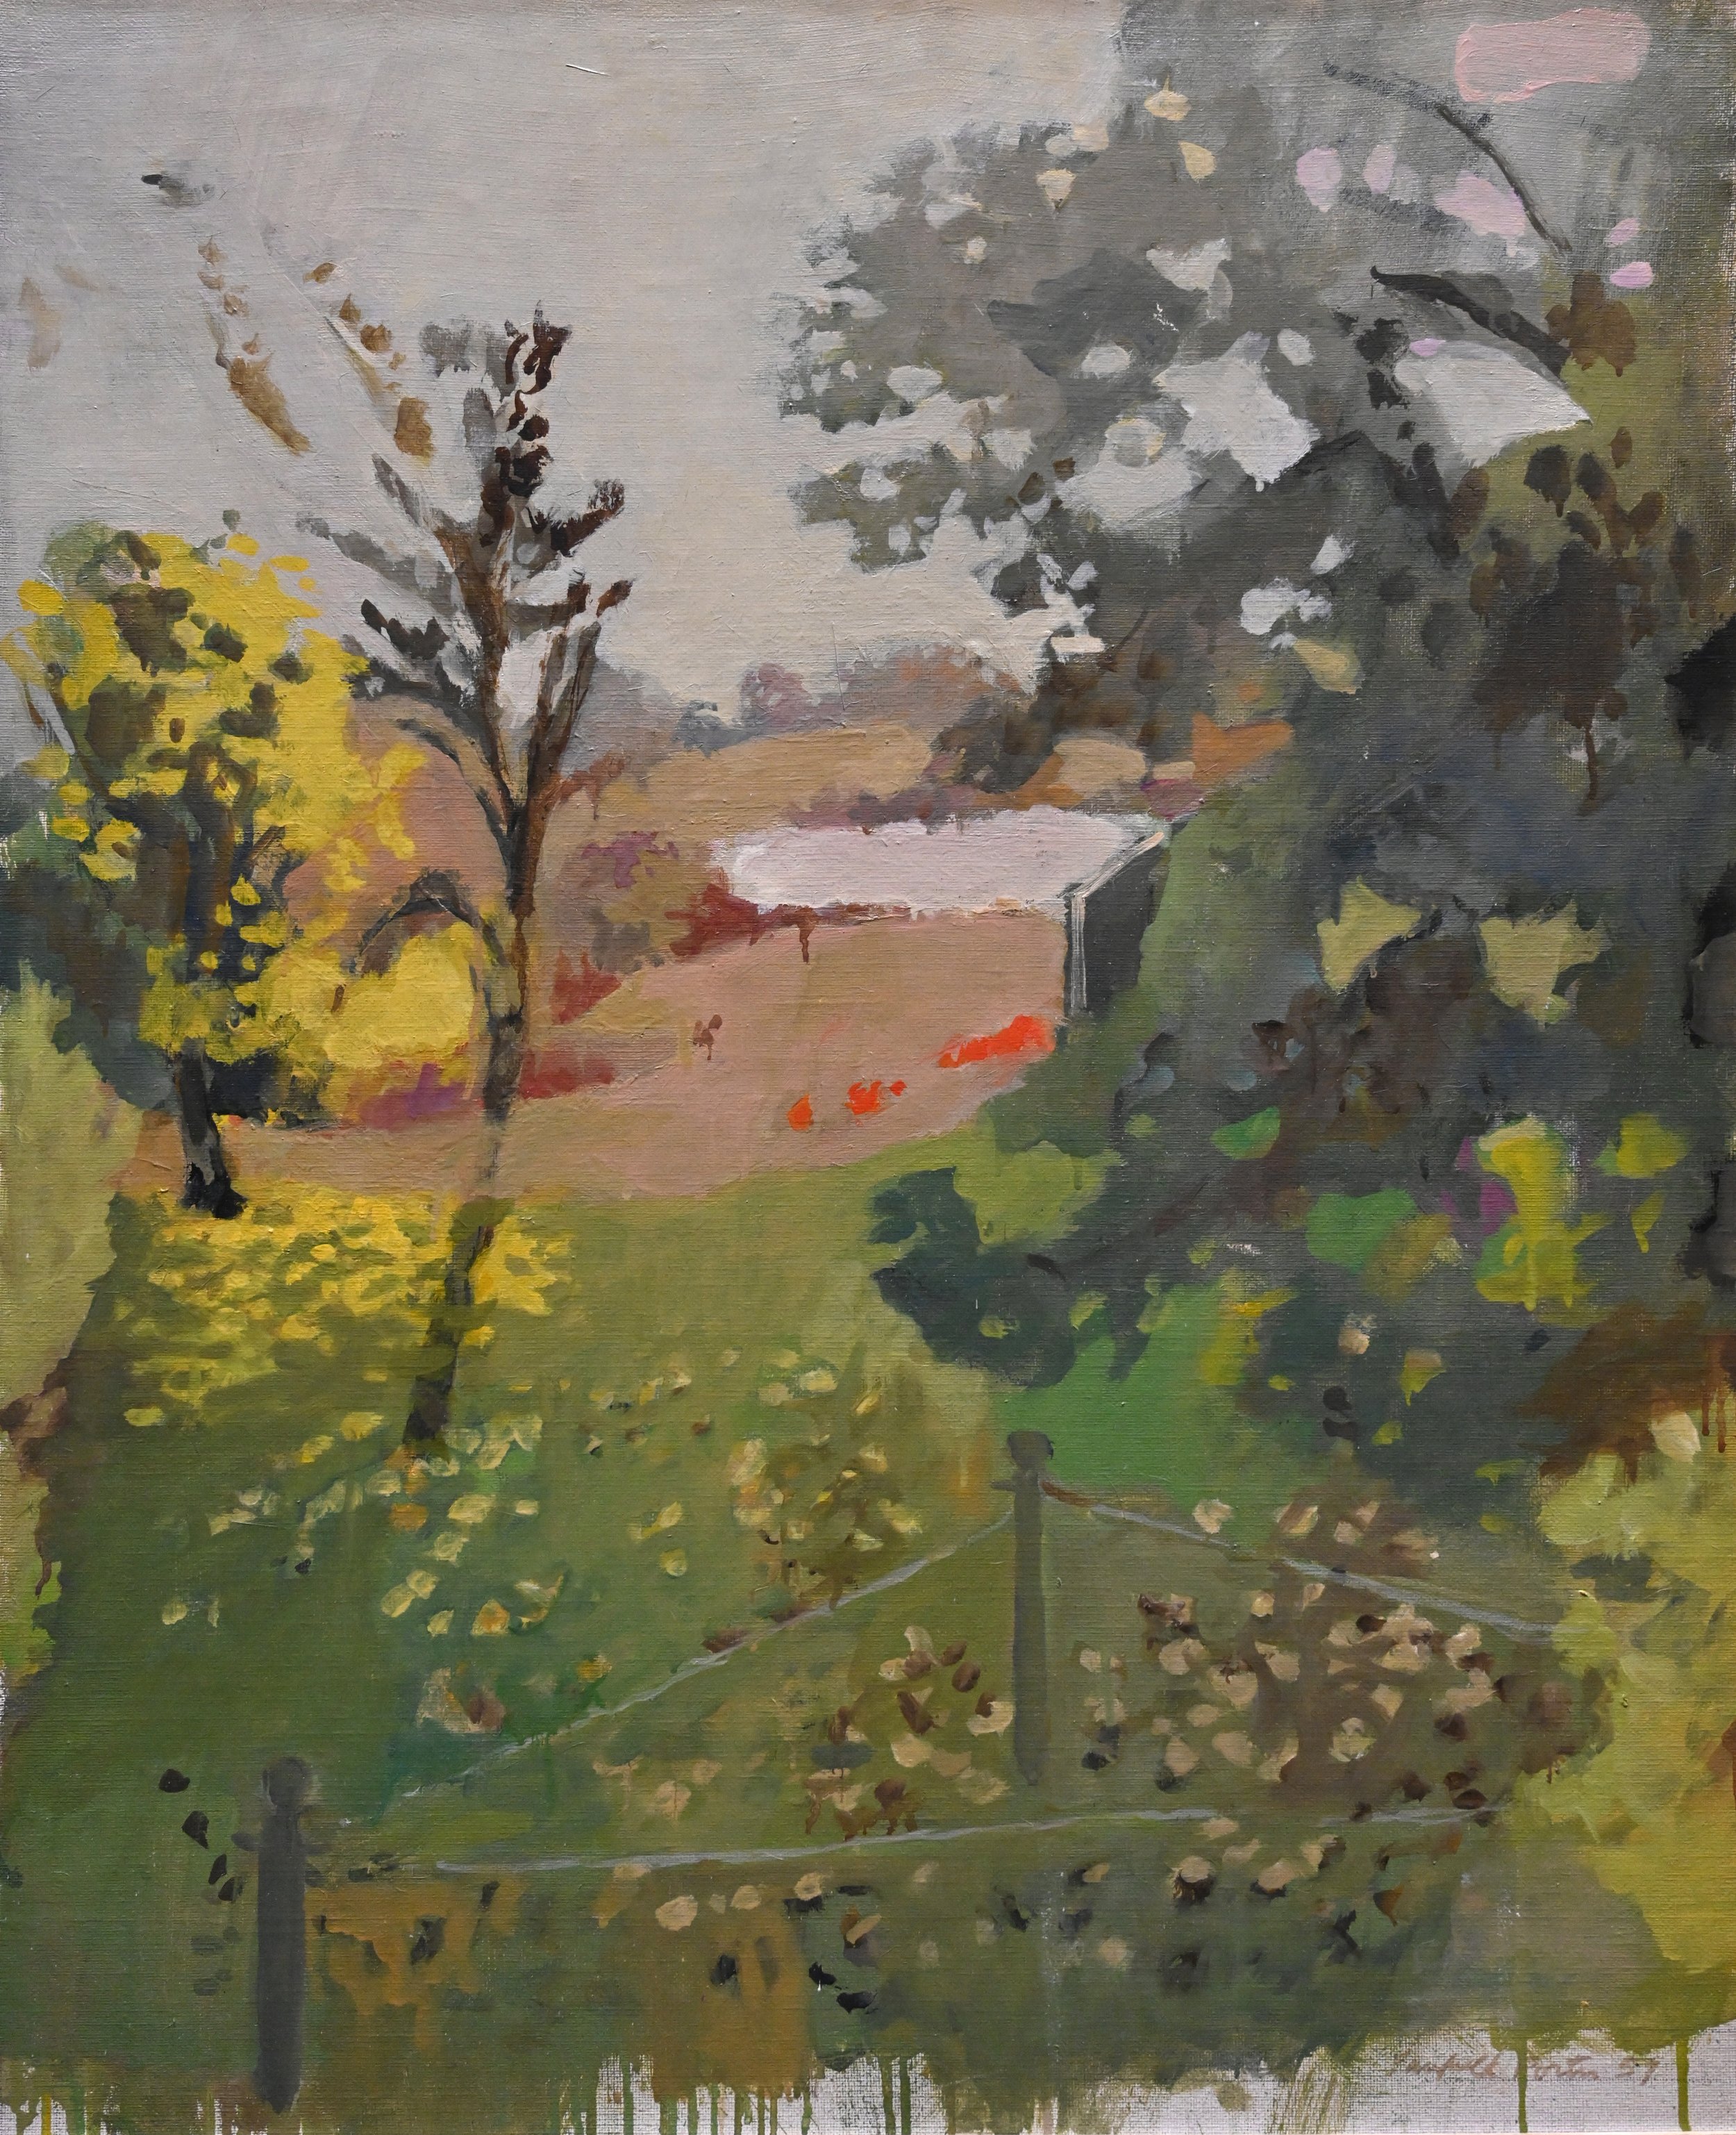  FAIRFIELD PORTER, (American, 1907-1975),  Untitled , 1957, Oil on canvas on Masonite, 32 x 26 inches, Gift of Mrs. Malcolm Shelton 